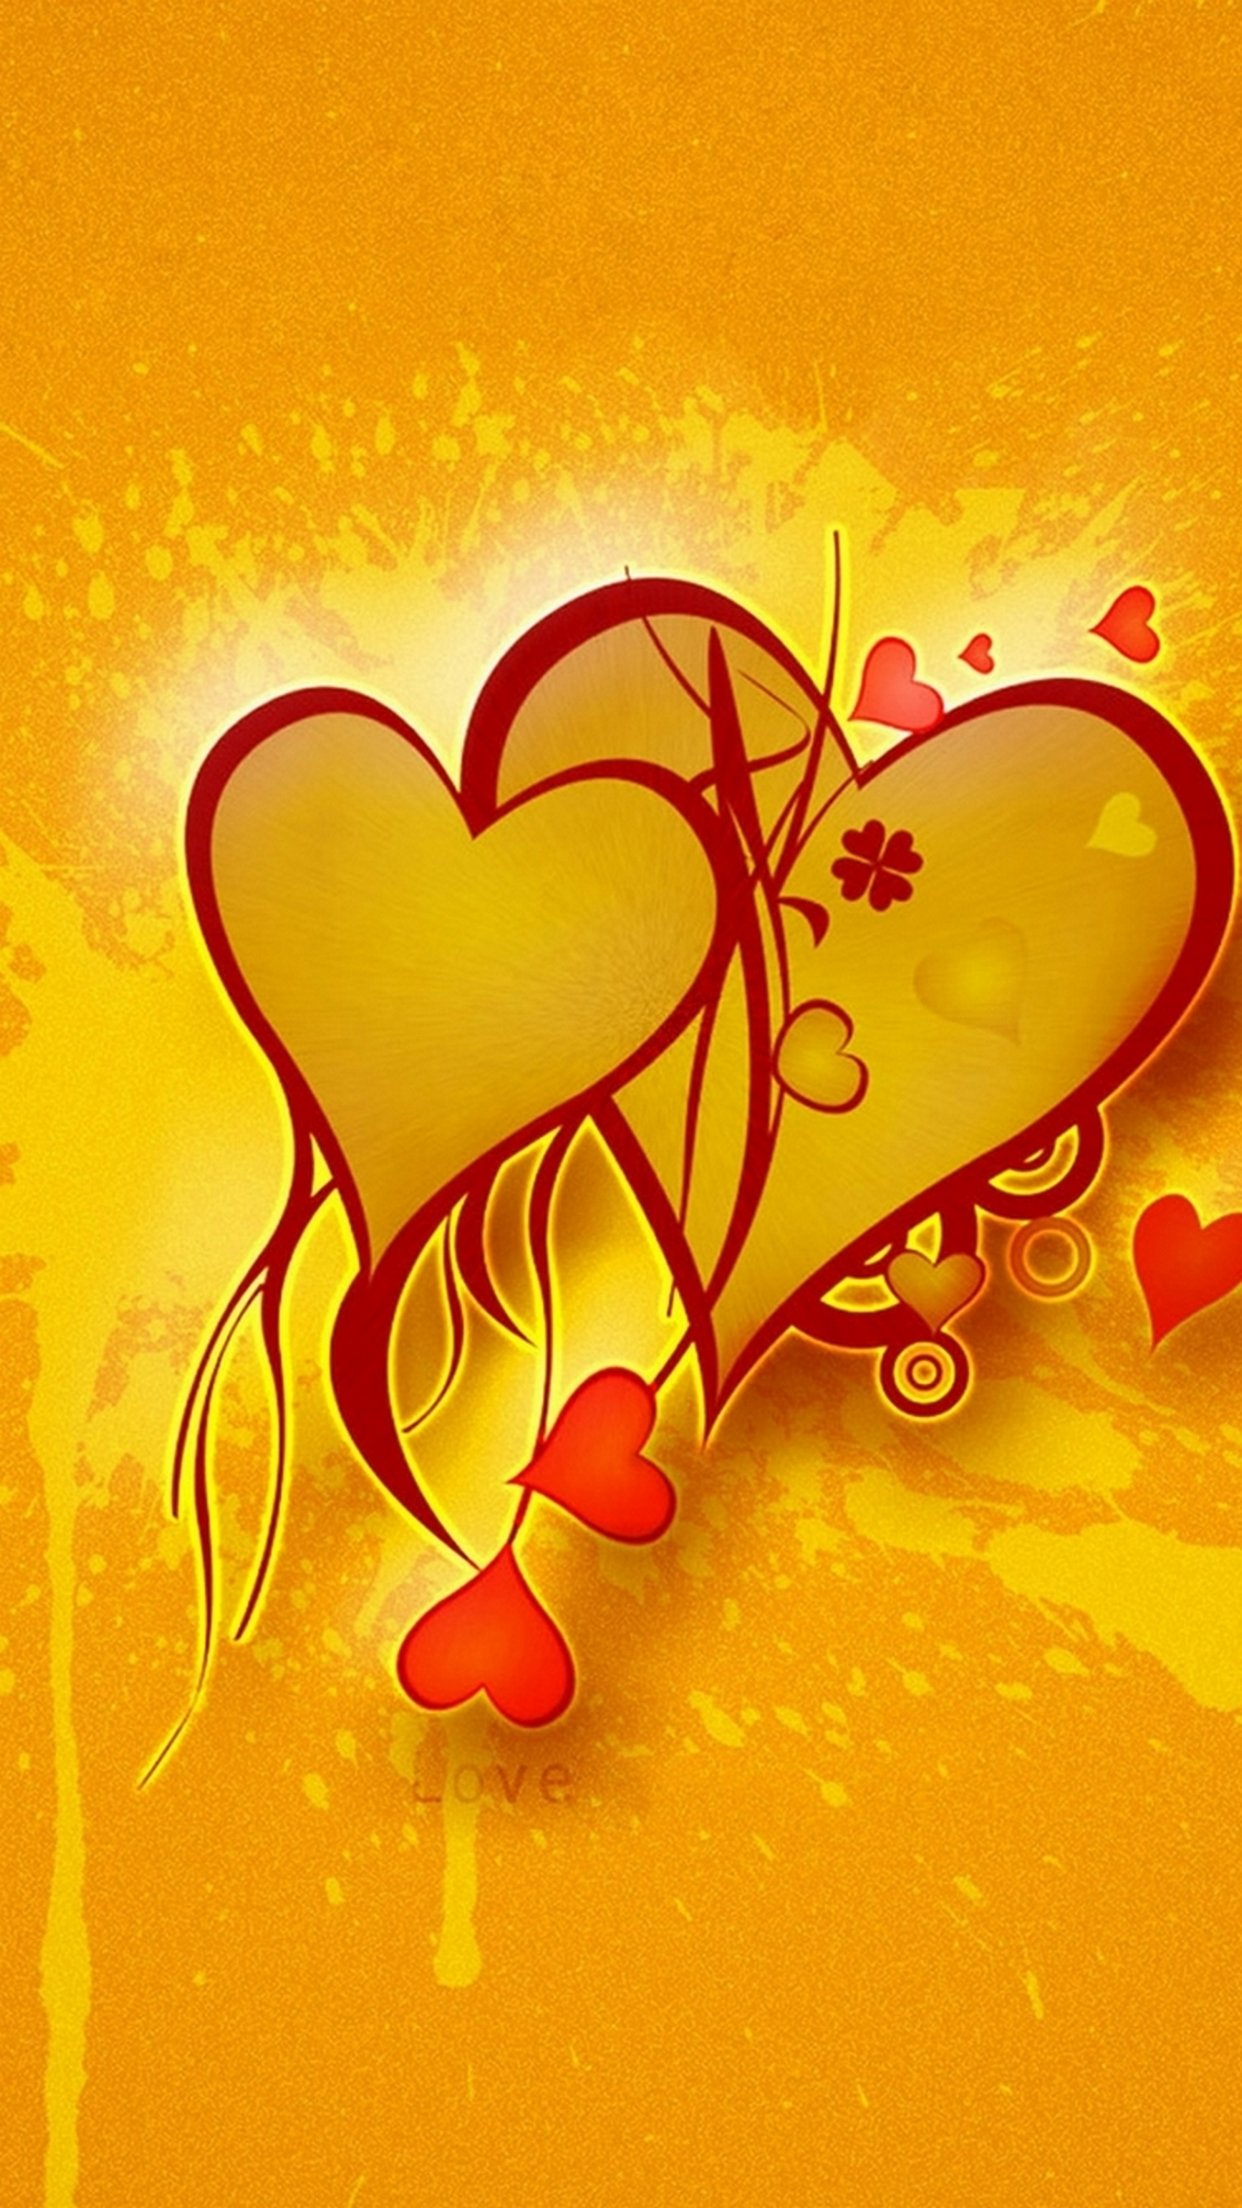 Love Hd Images For Mobile : Here you can find the best love hd